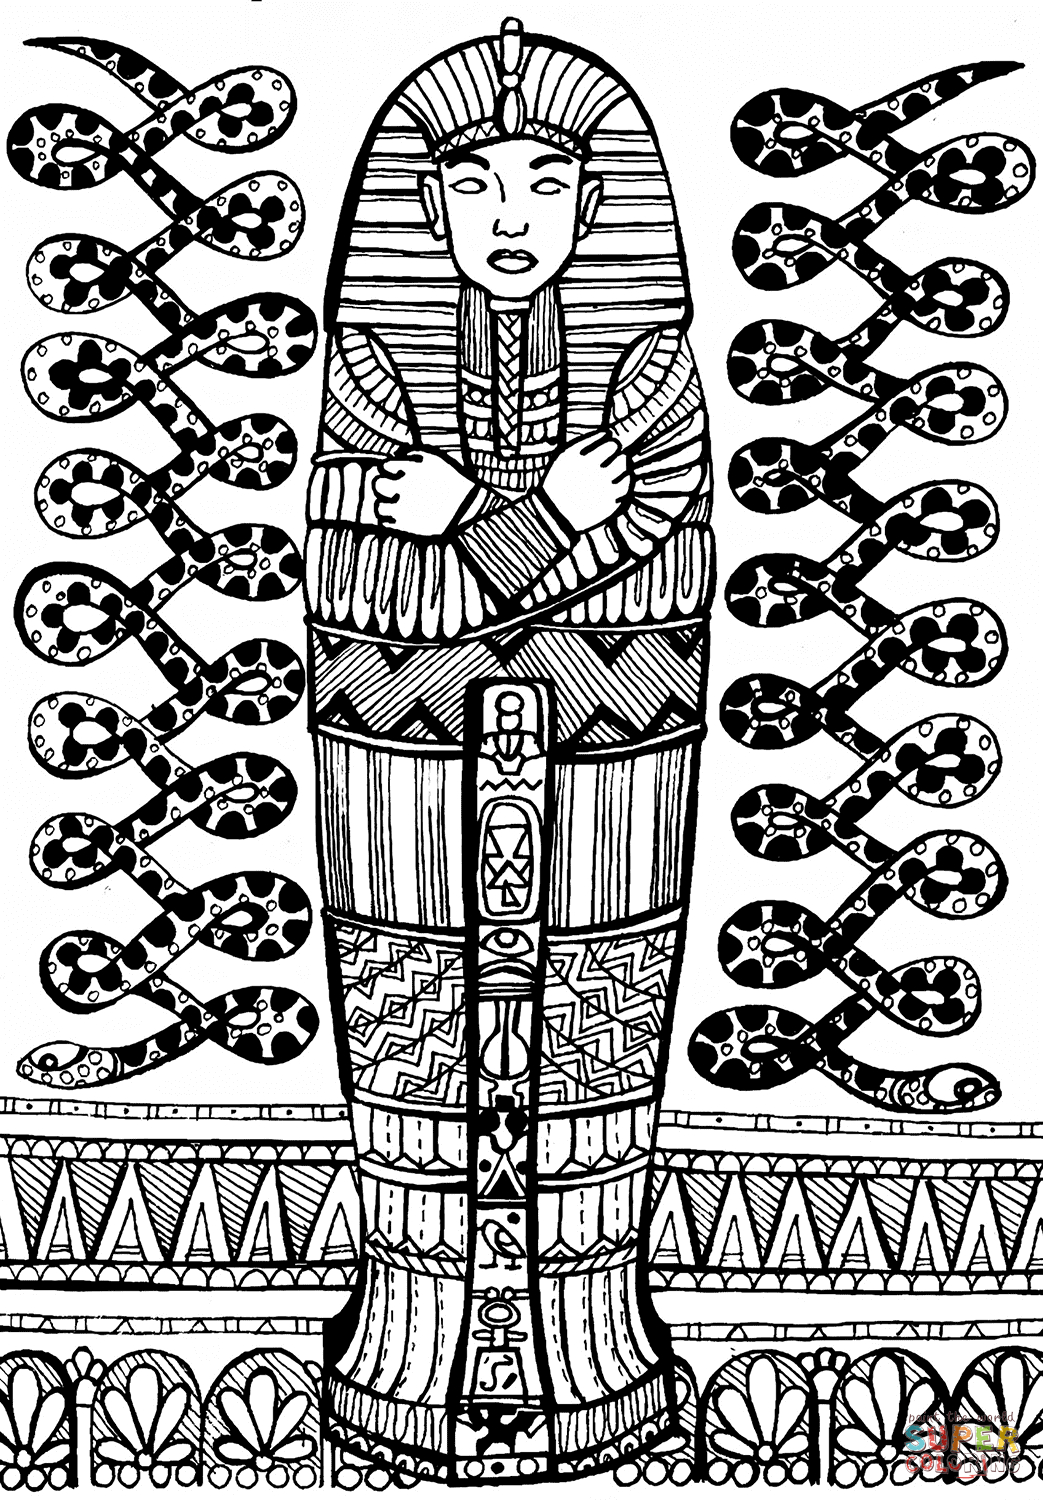 3 Sarcophagus Drawing Printable For Free Download On Ayoqq - Free Printable Sarcophagus